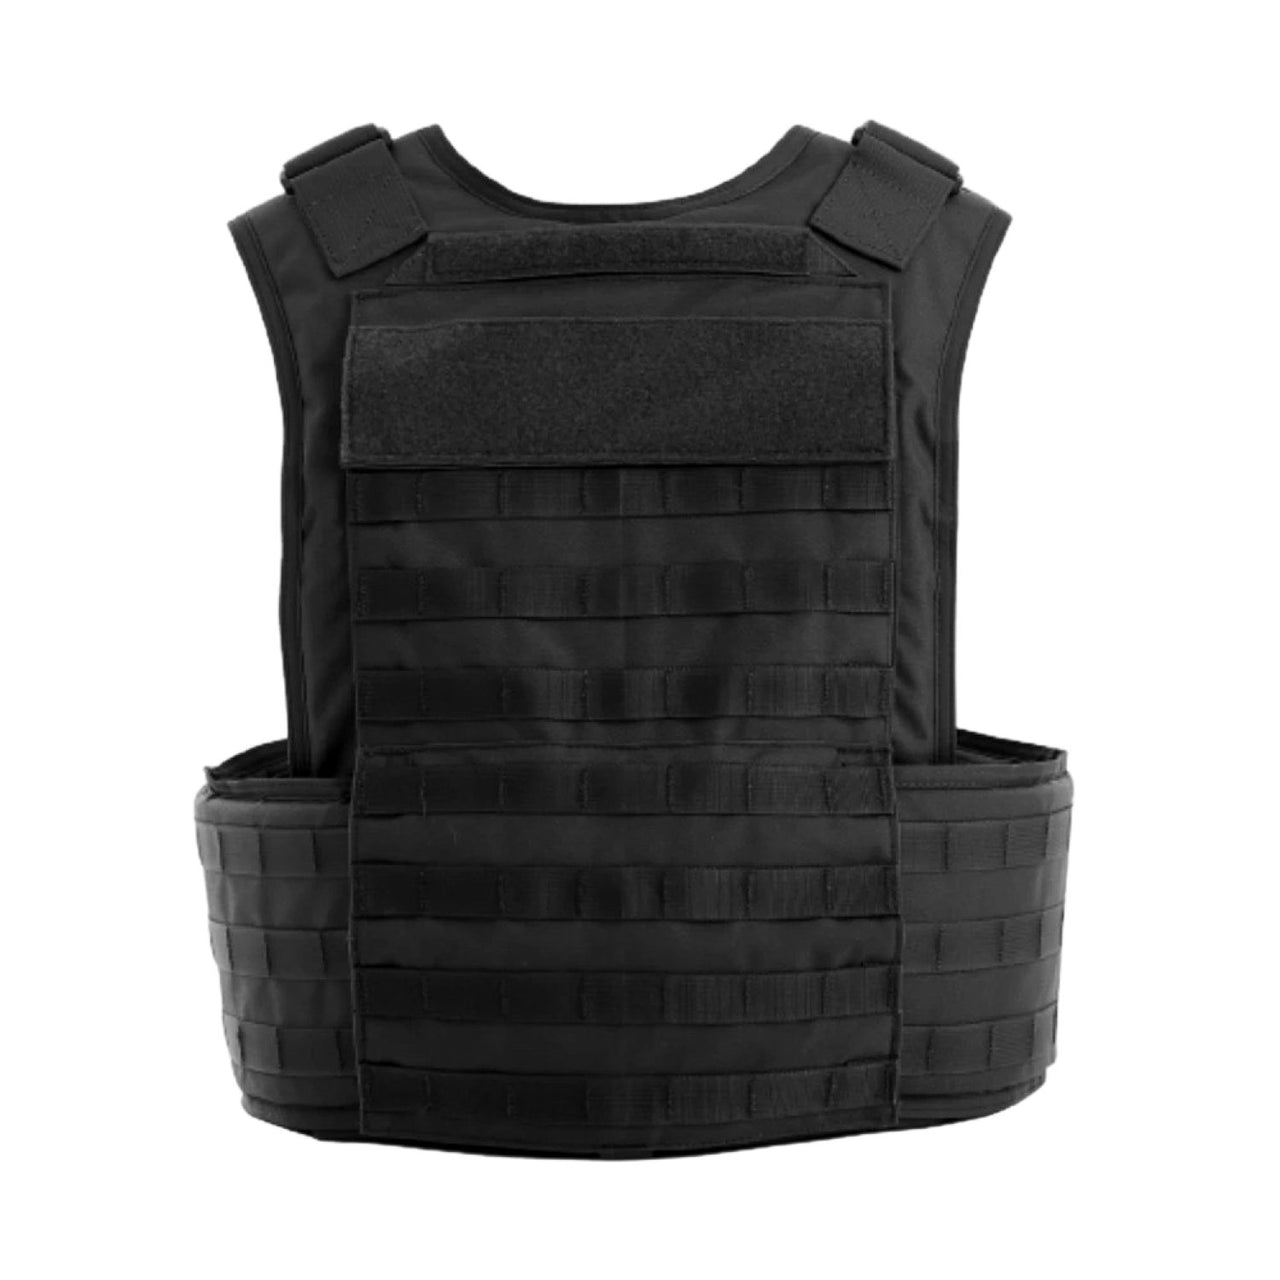 Multi-threat Level IIIA ballistics bulletproof vest by Body Armor Direct isolated on a white background.